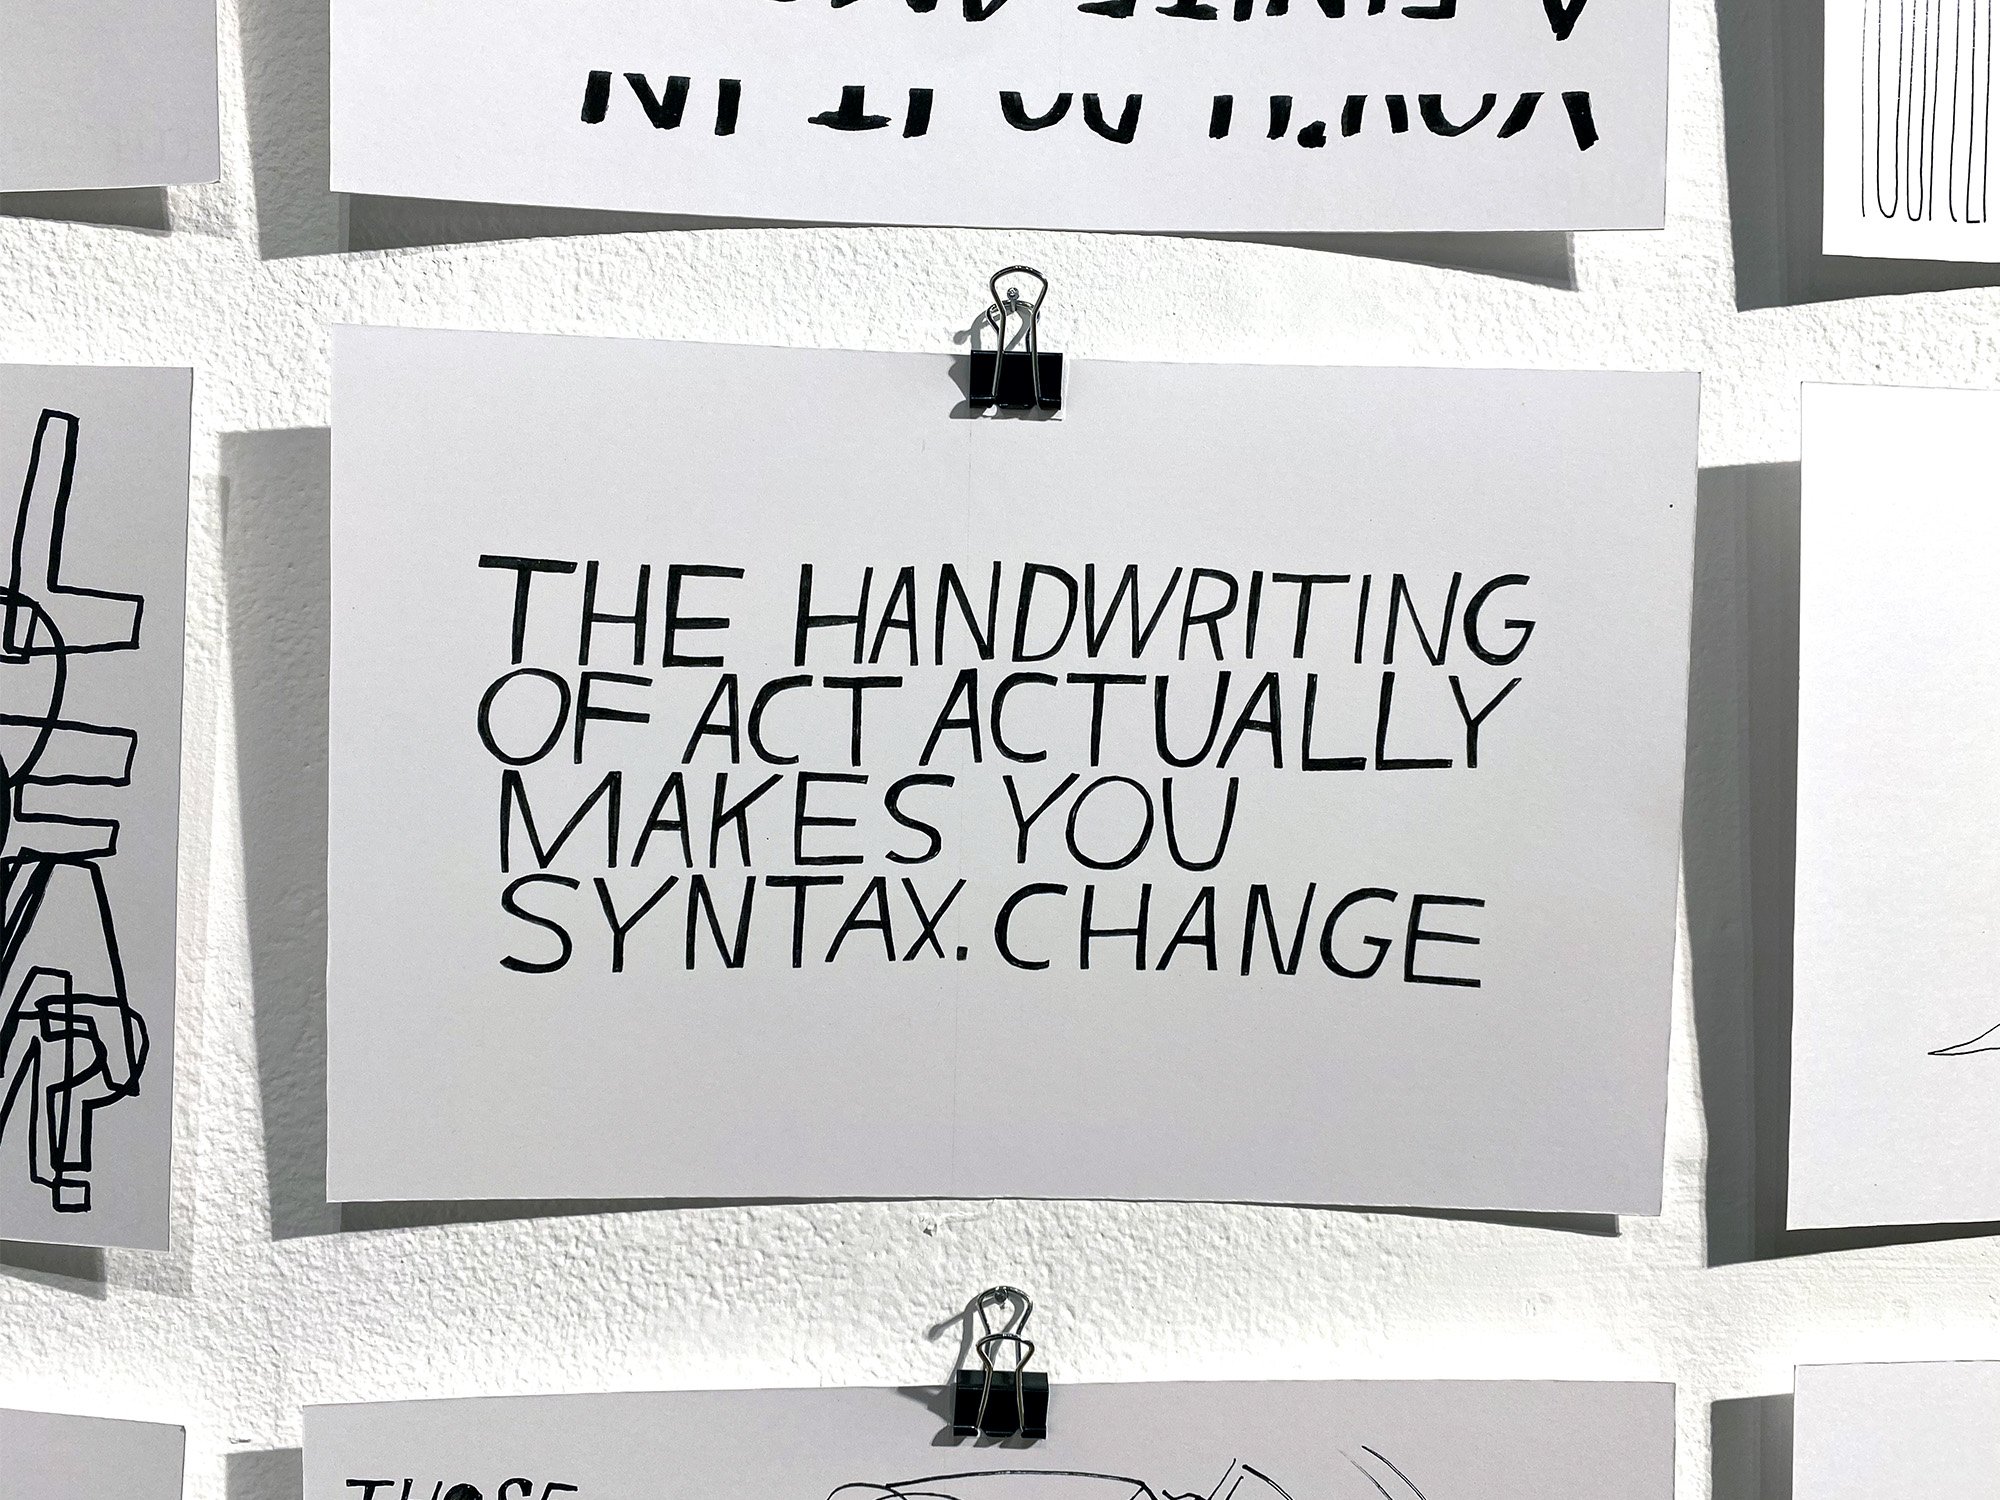 March 7, 2015: The act of handwriting actually makes you change syntax.